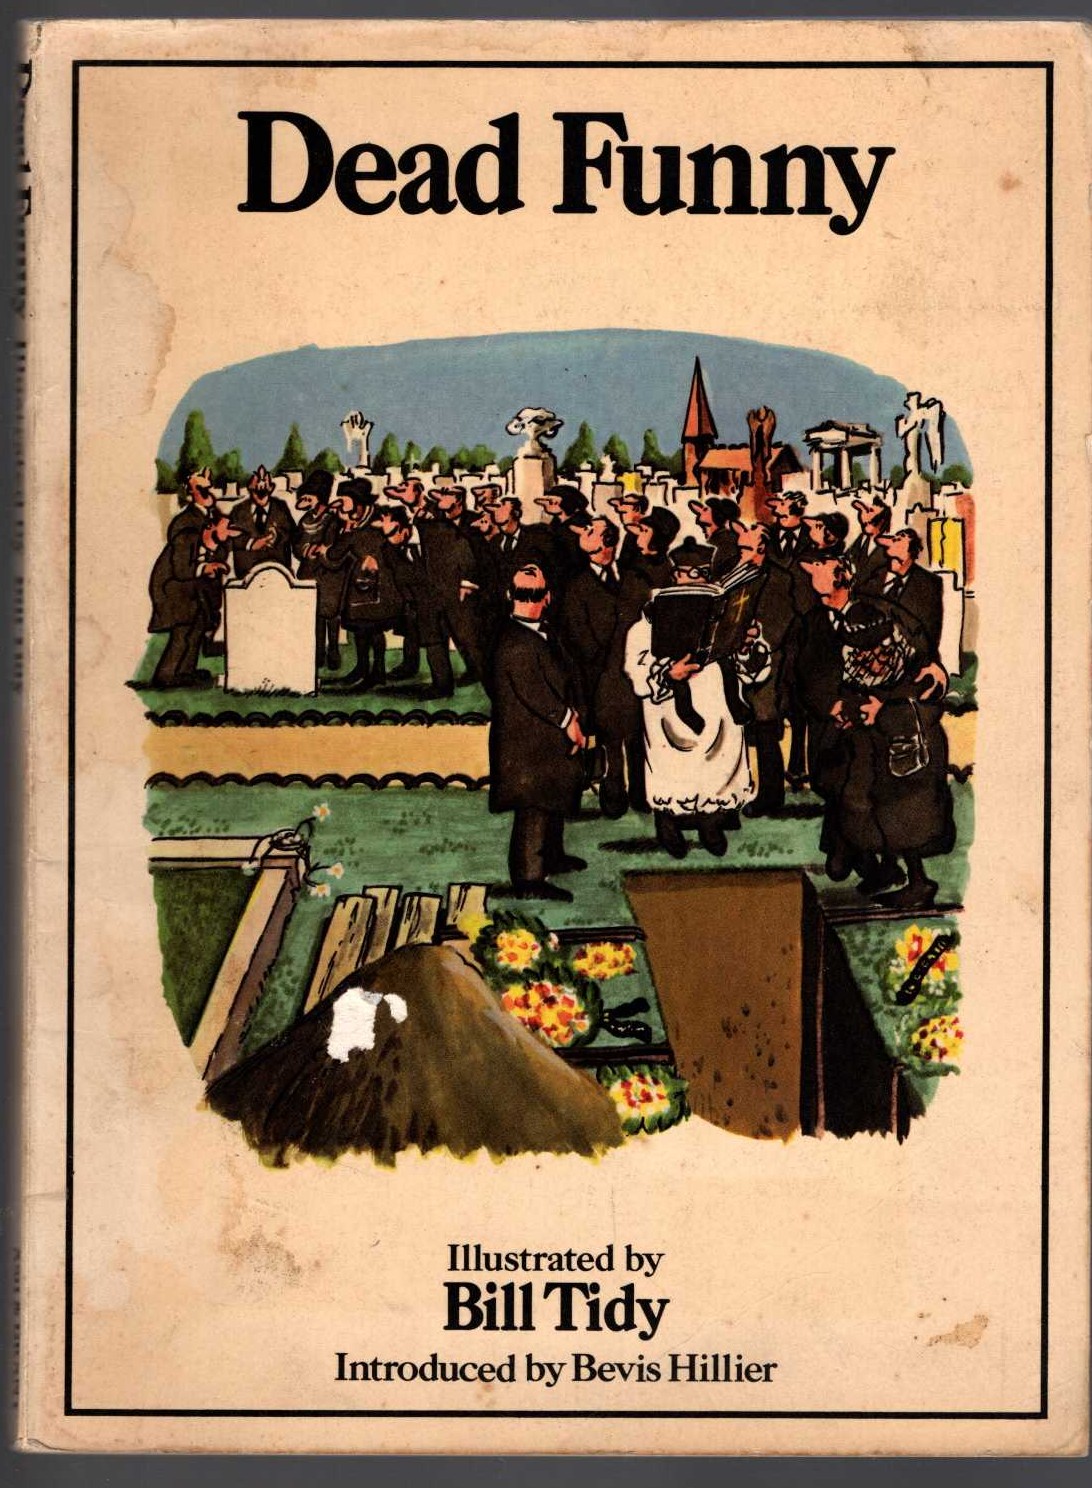 Bill Tidy  DEAD FUNNY (Introduced by Bevis Hillier) front book cover image